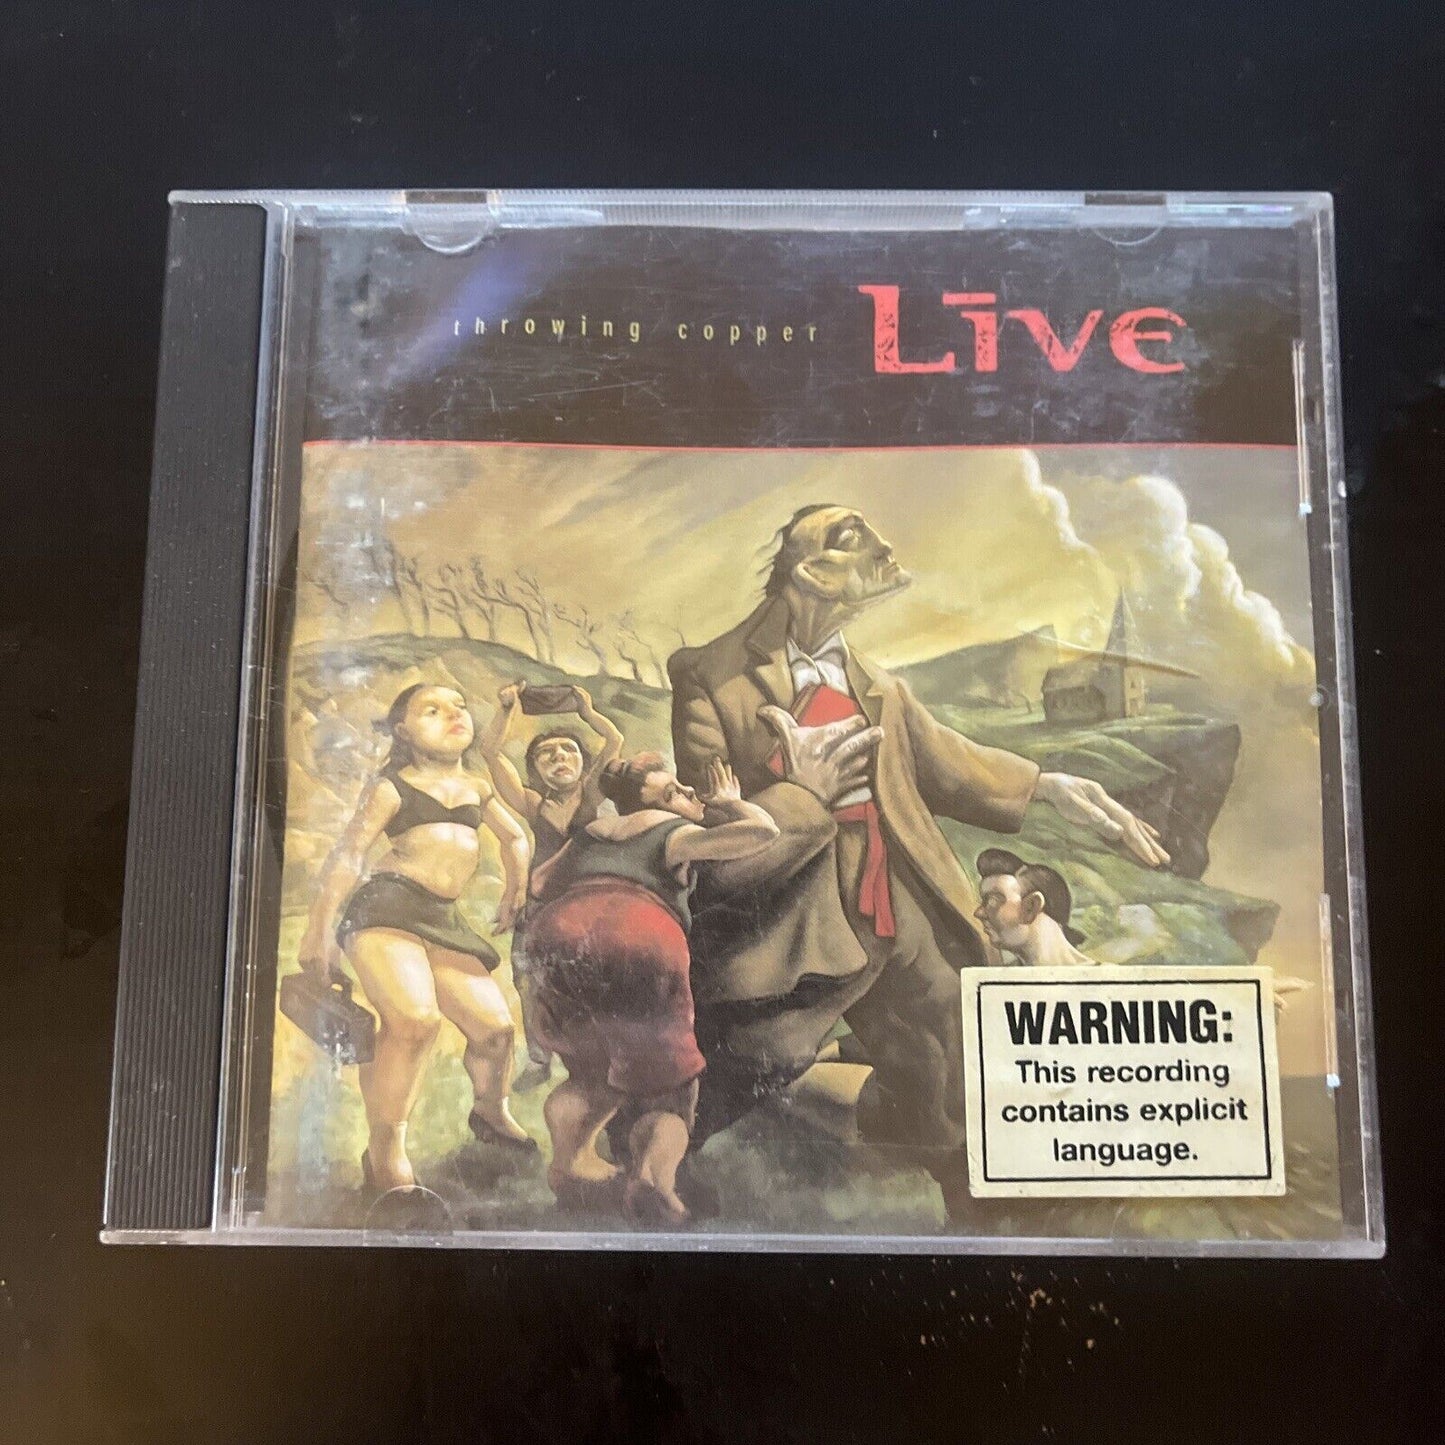 Live  - Throwing Copper (CD, 1994)